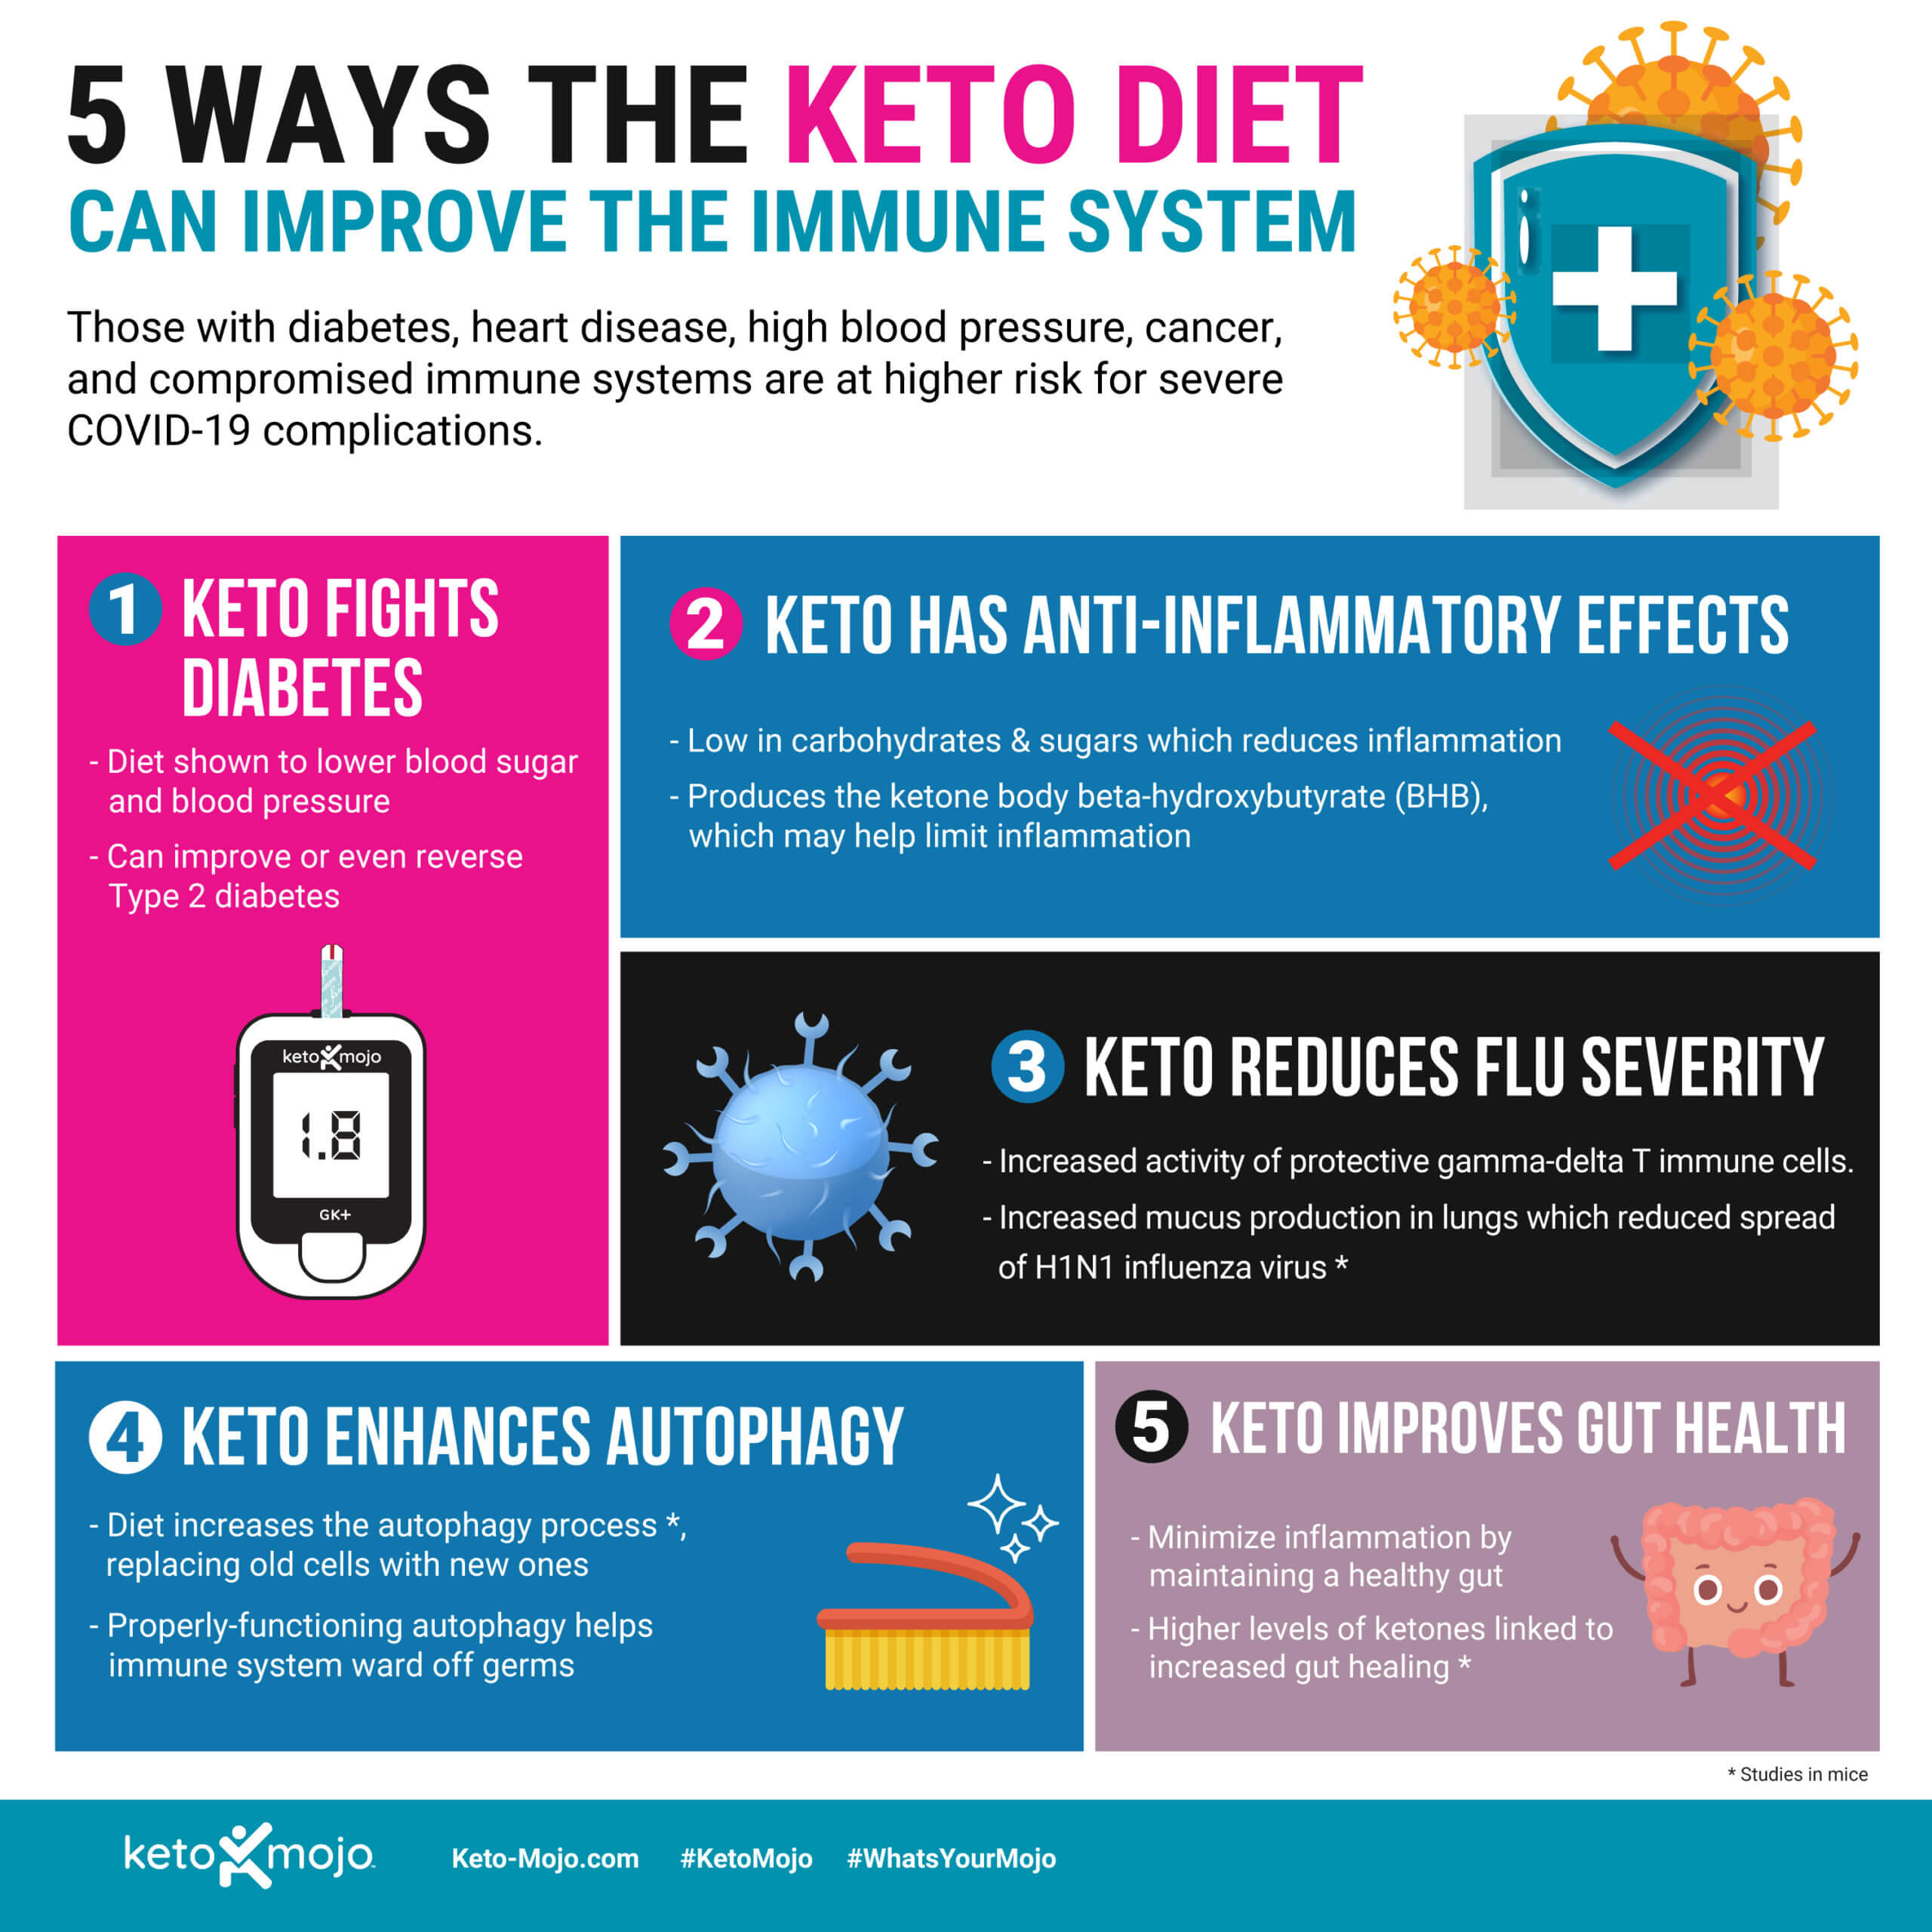 Keto and Immune System